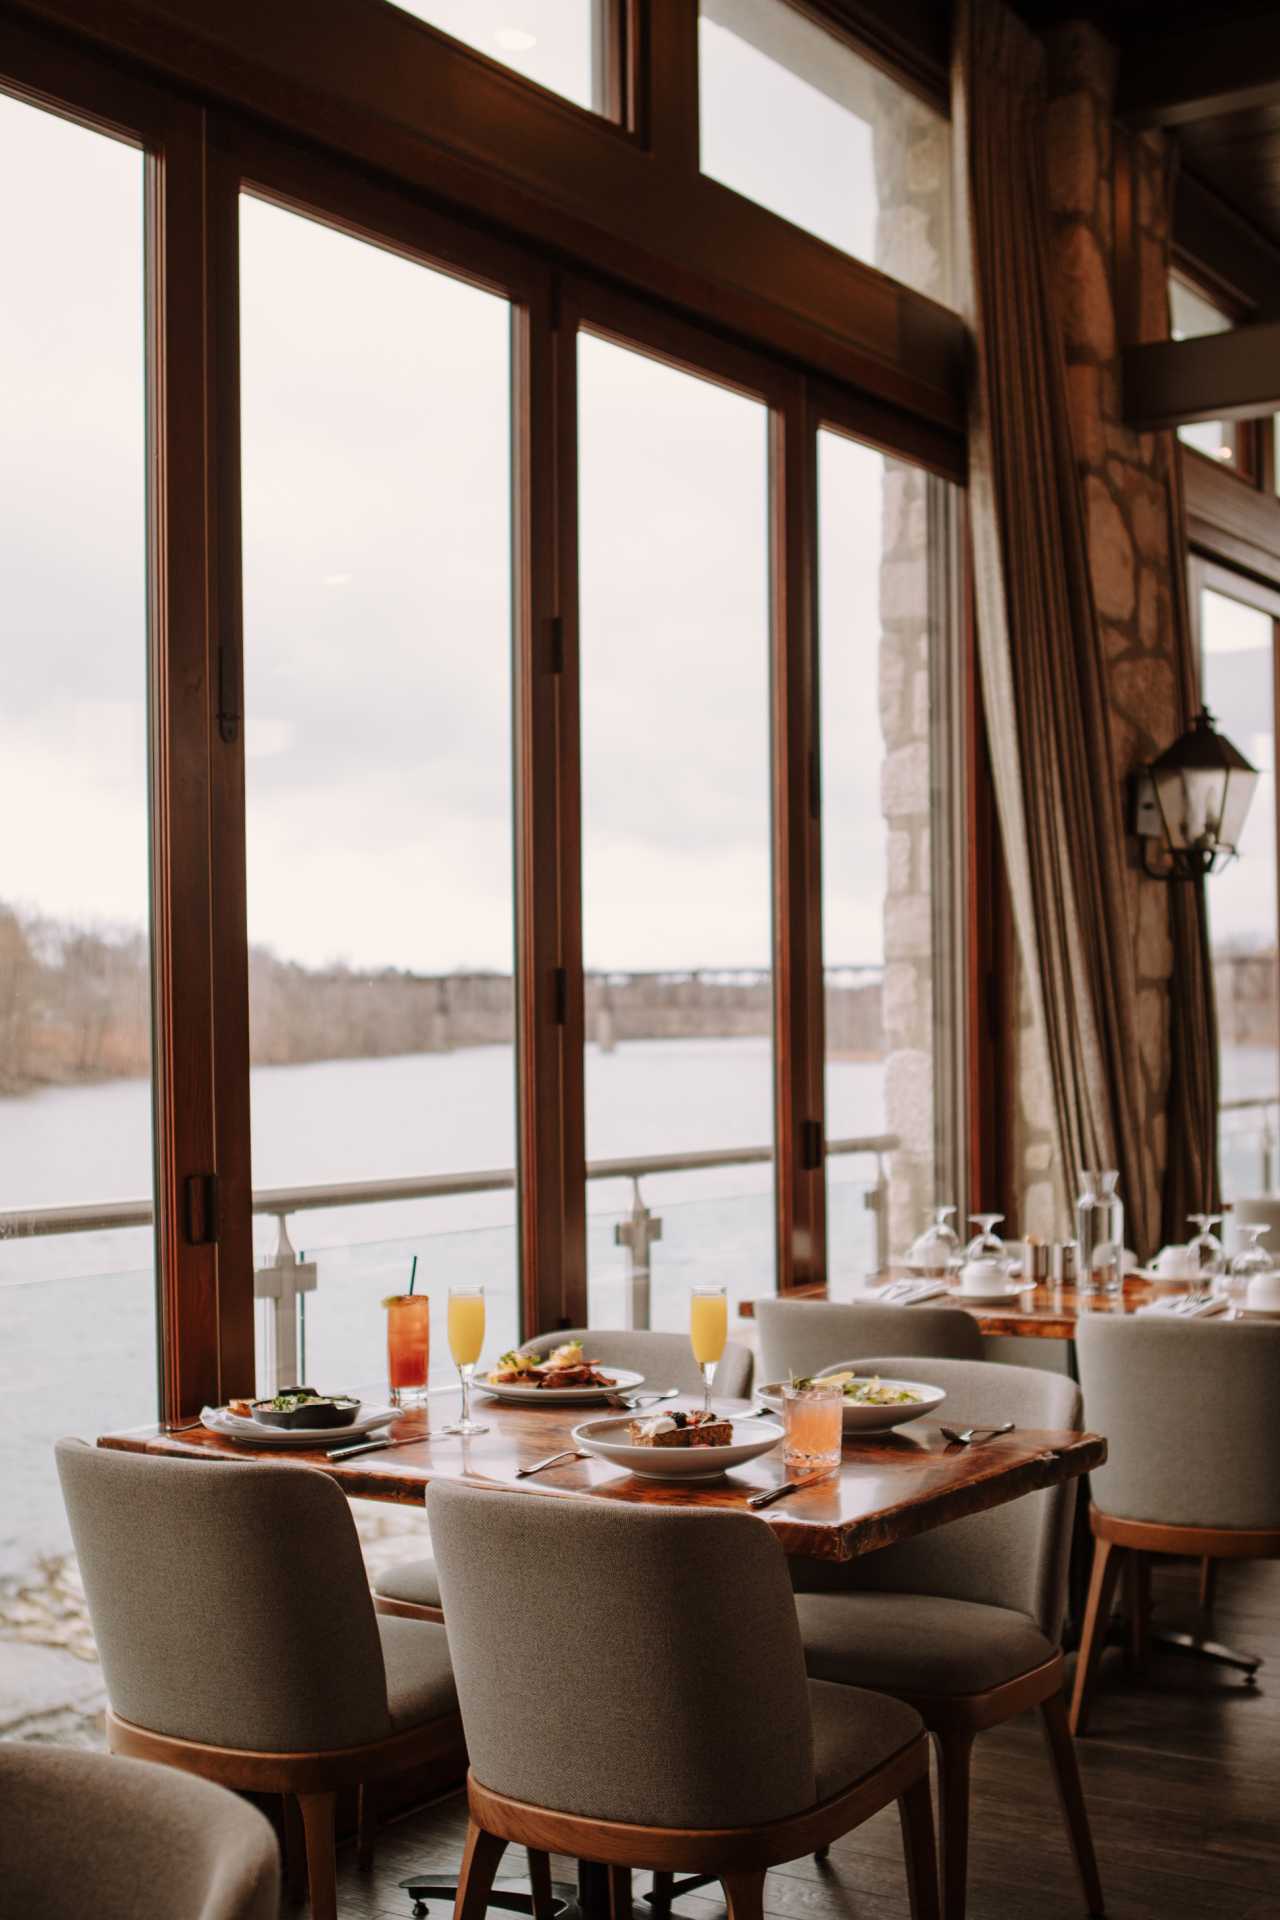 Cambridge Mill | A brunch spread on a table with a view of the Grand River